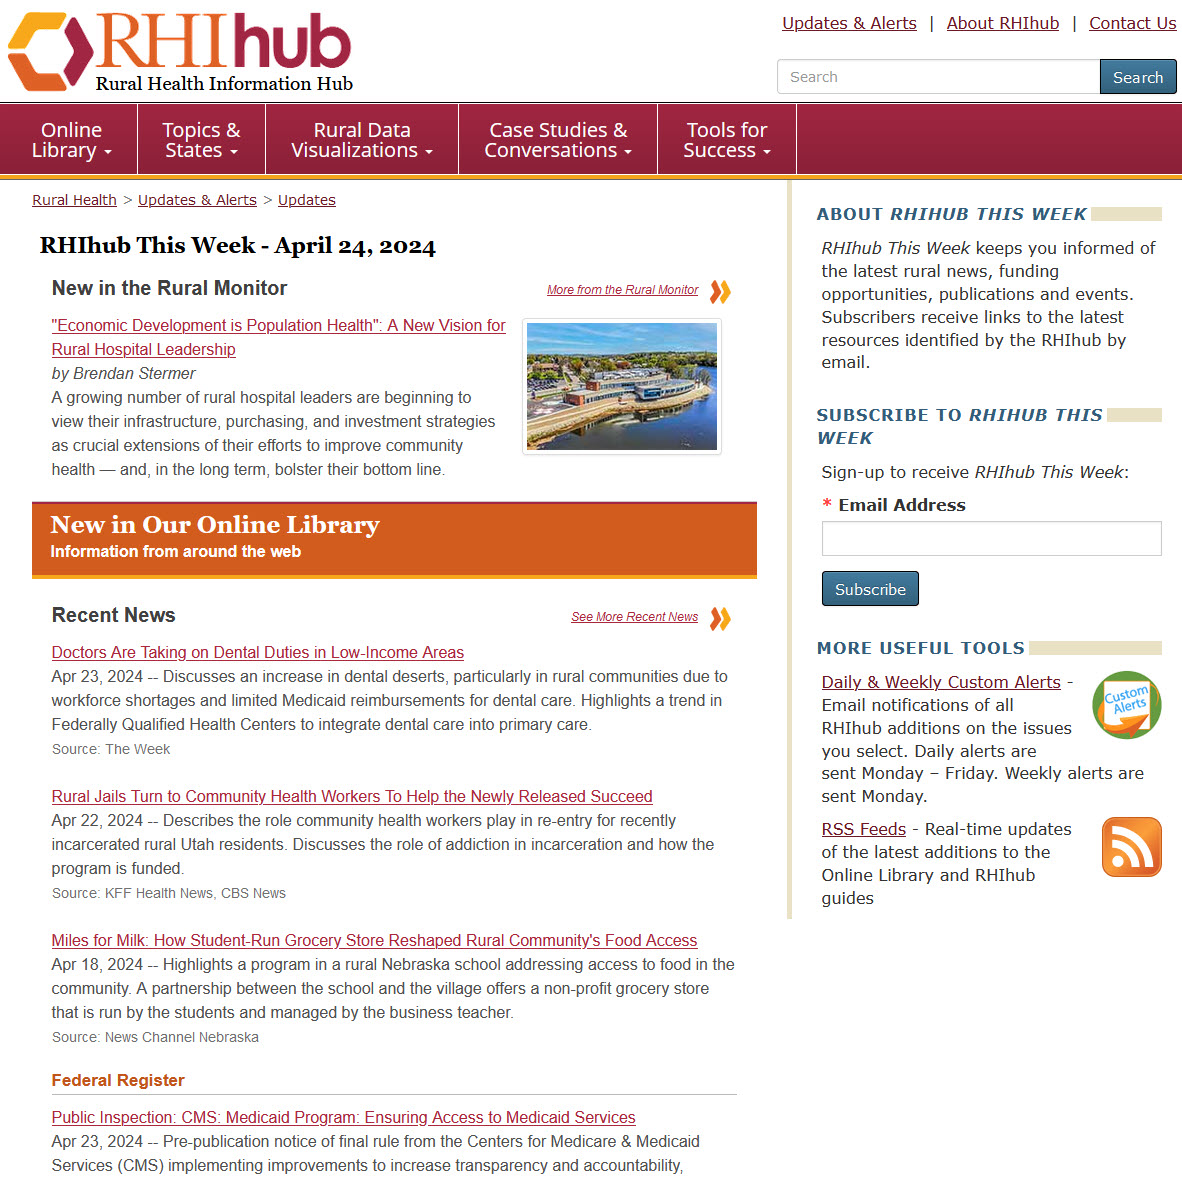 ICYMI: Our recent #RHIhubThisWeek features our newest Rural Monitor article on hospitals + economic development; LTC staffing final rule; SAMHSA suicide prevention national strategy; and more! ruralhealthinfo.org/updates/2024-0…